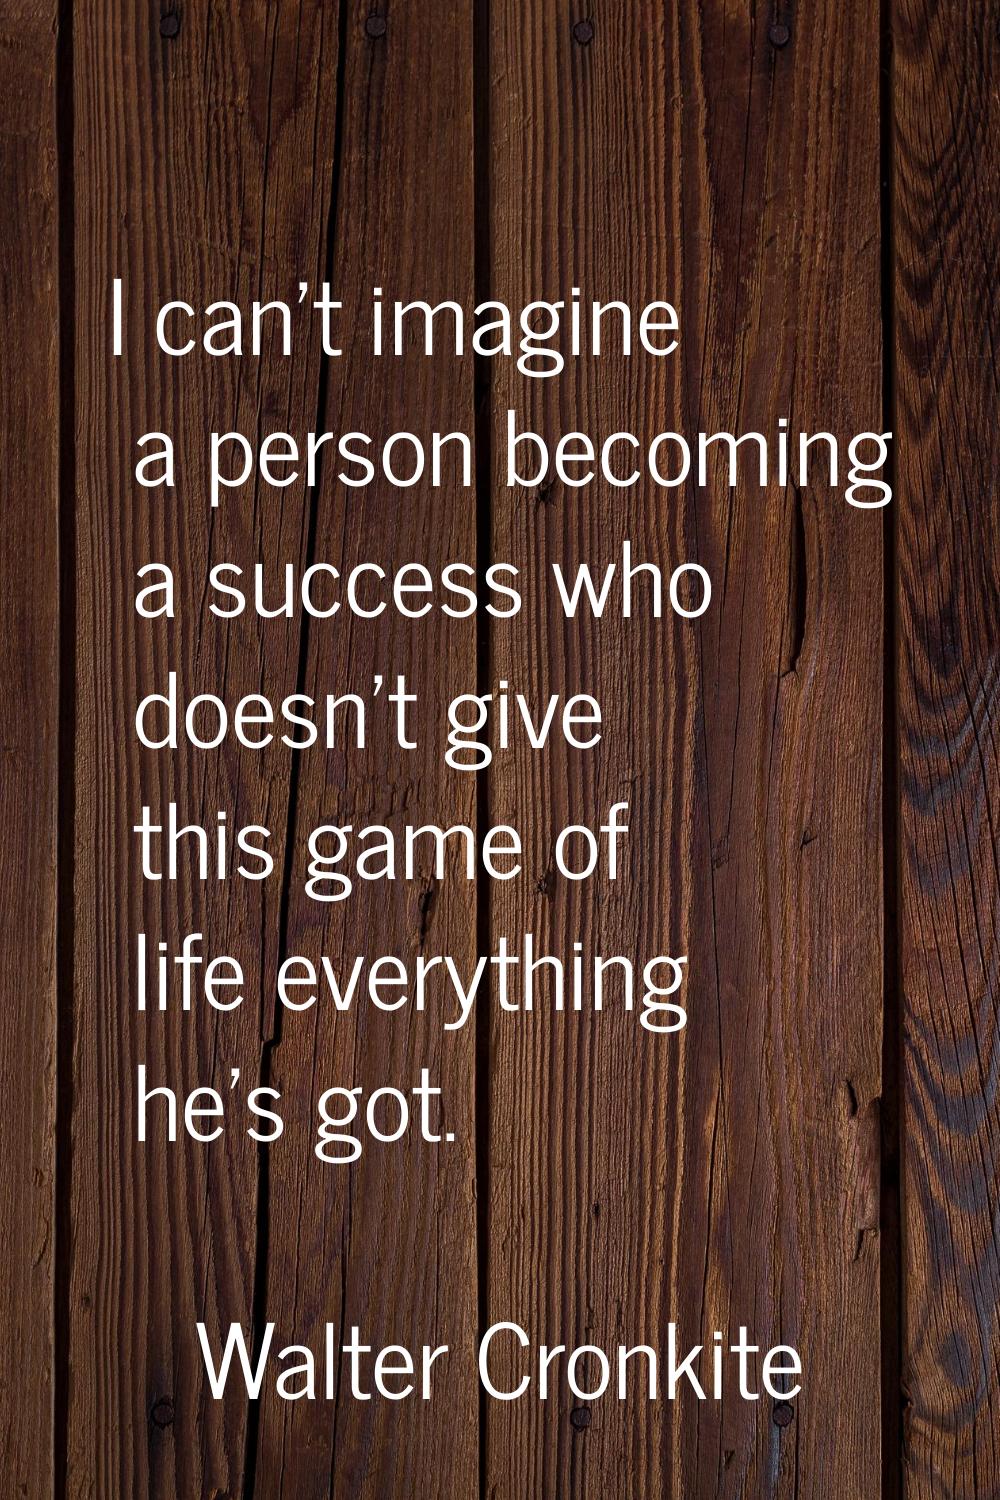 I can't imagine a person becoming a success who doesn't give this game of life everything he's got.